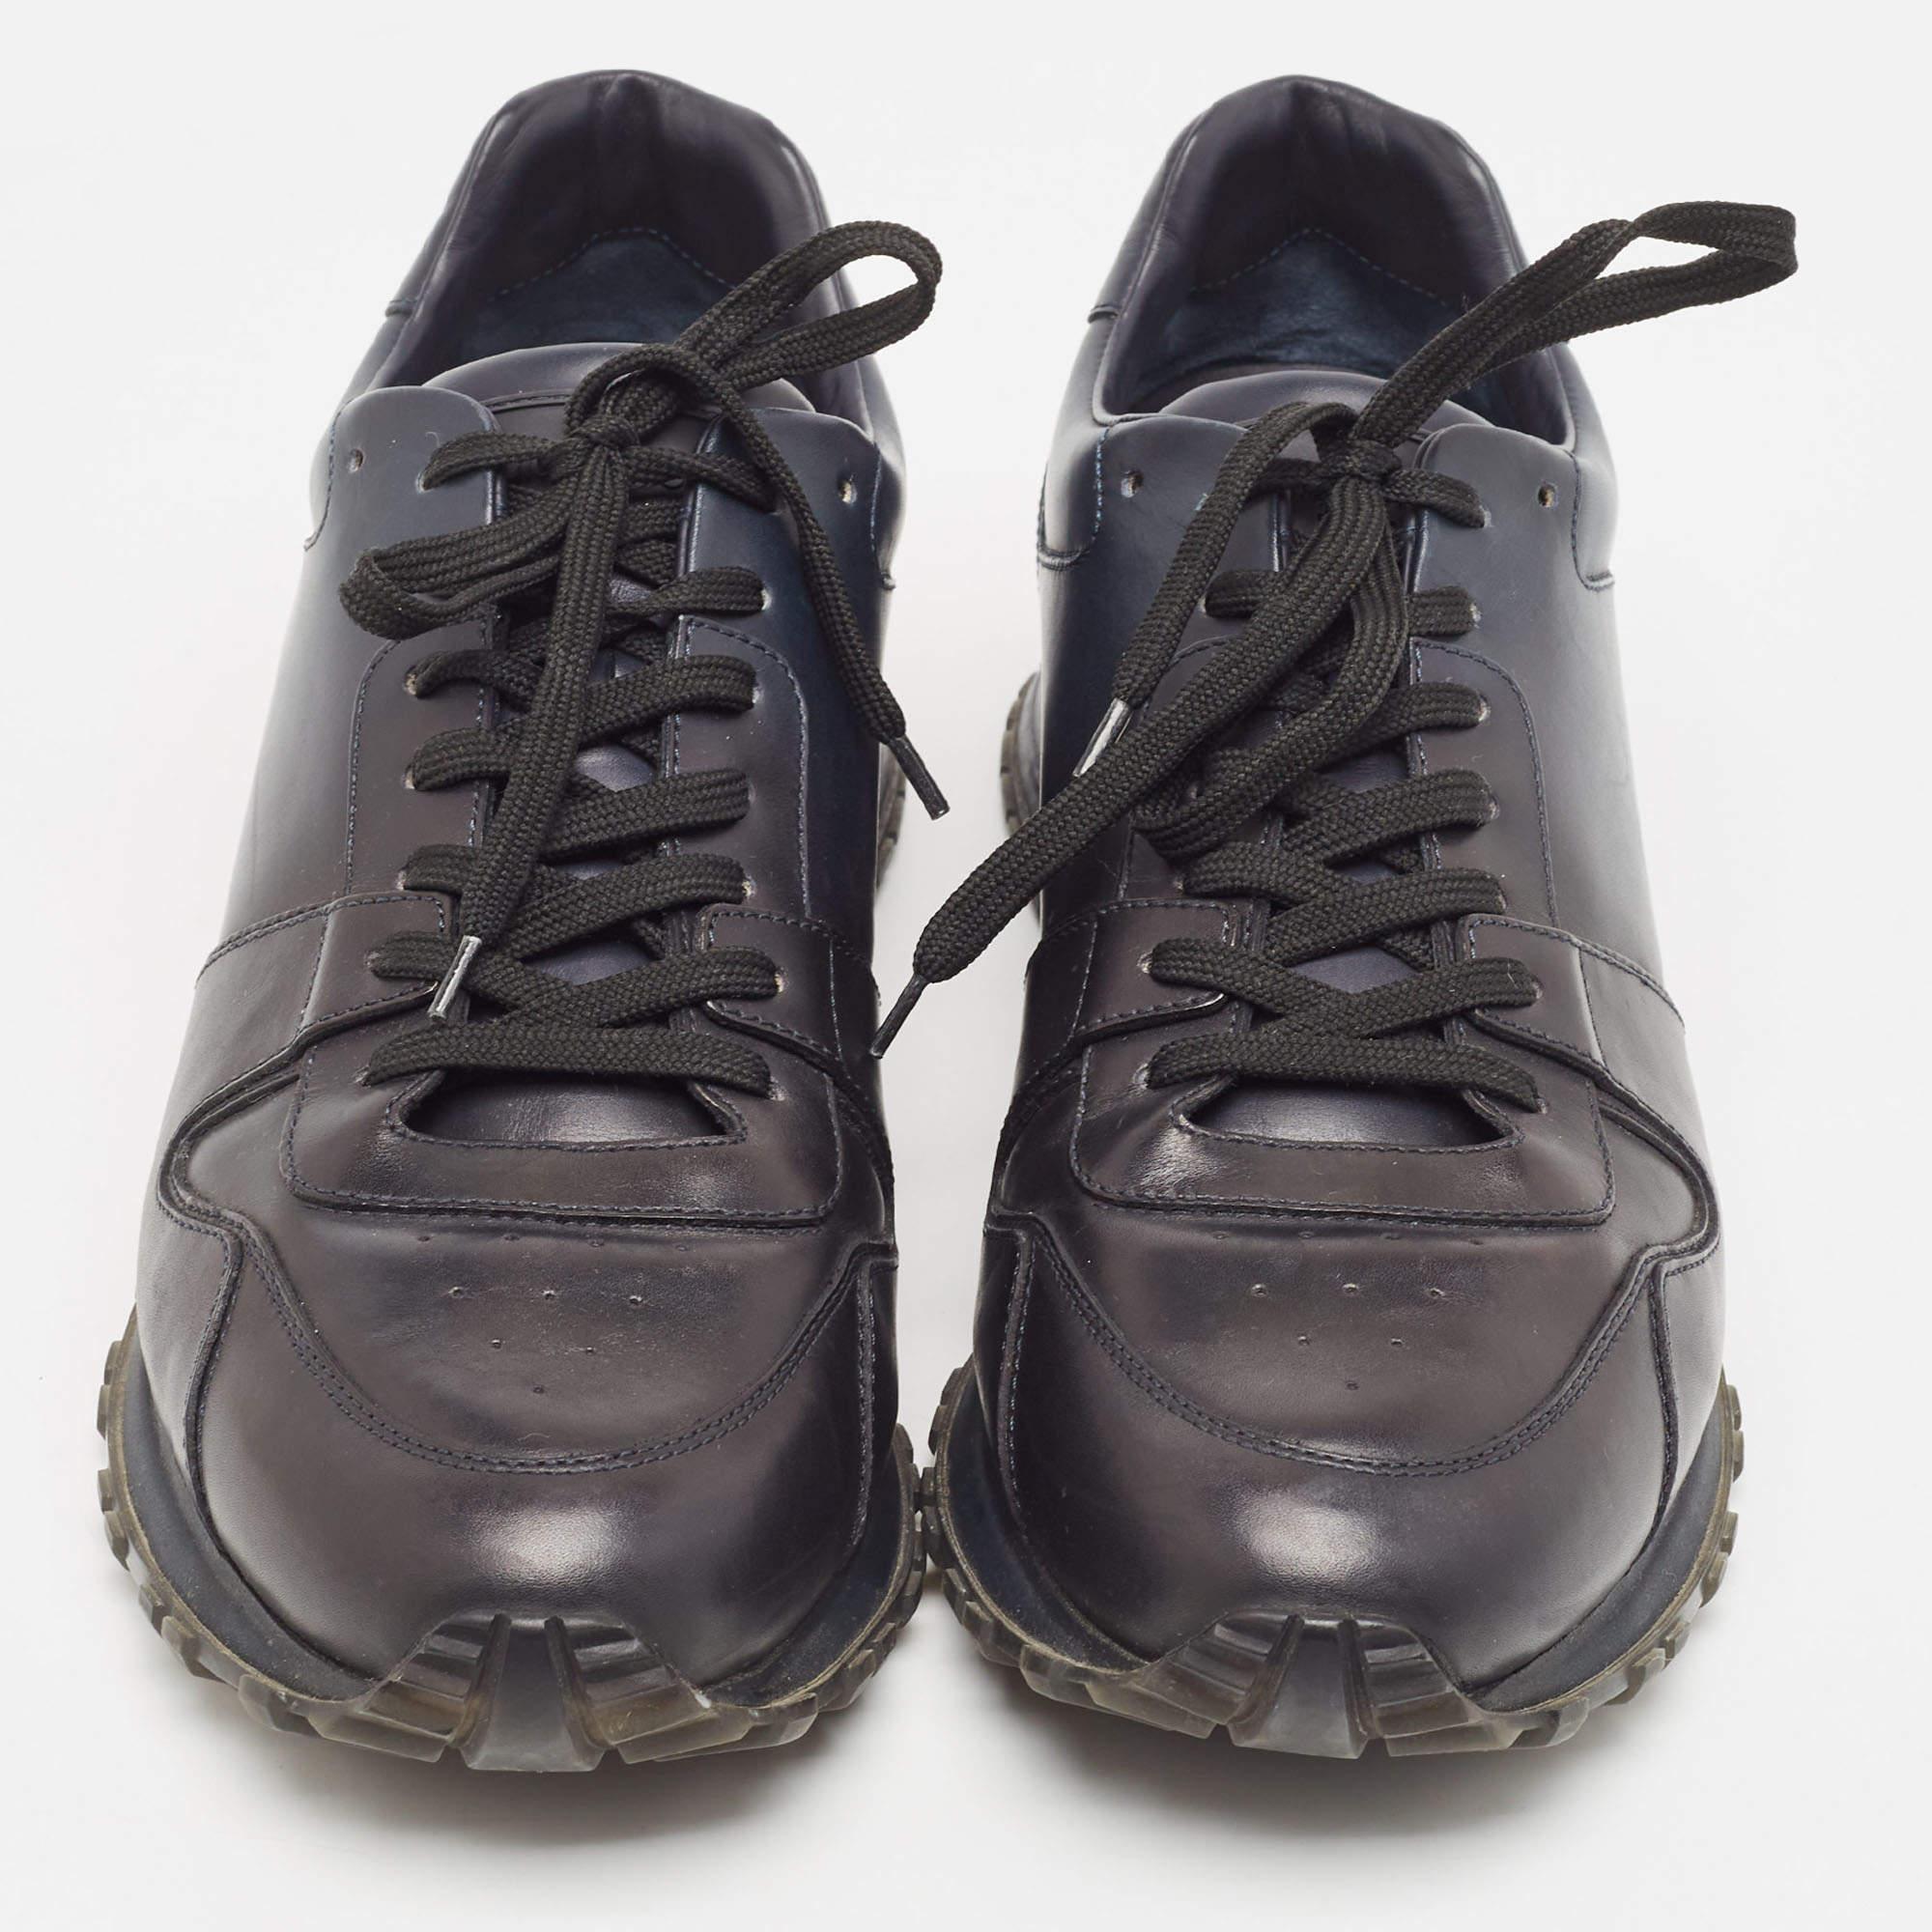 Made to provide comfort, these Run Away sneakers by Louis Vuitton are trendy and stylish. They've been crafted from leather and designed with lace-up vamps and the label on the metal inserts. Wear them with your casual outfits for a sporty look